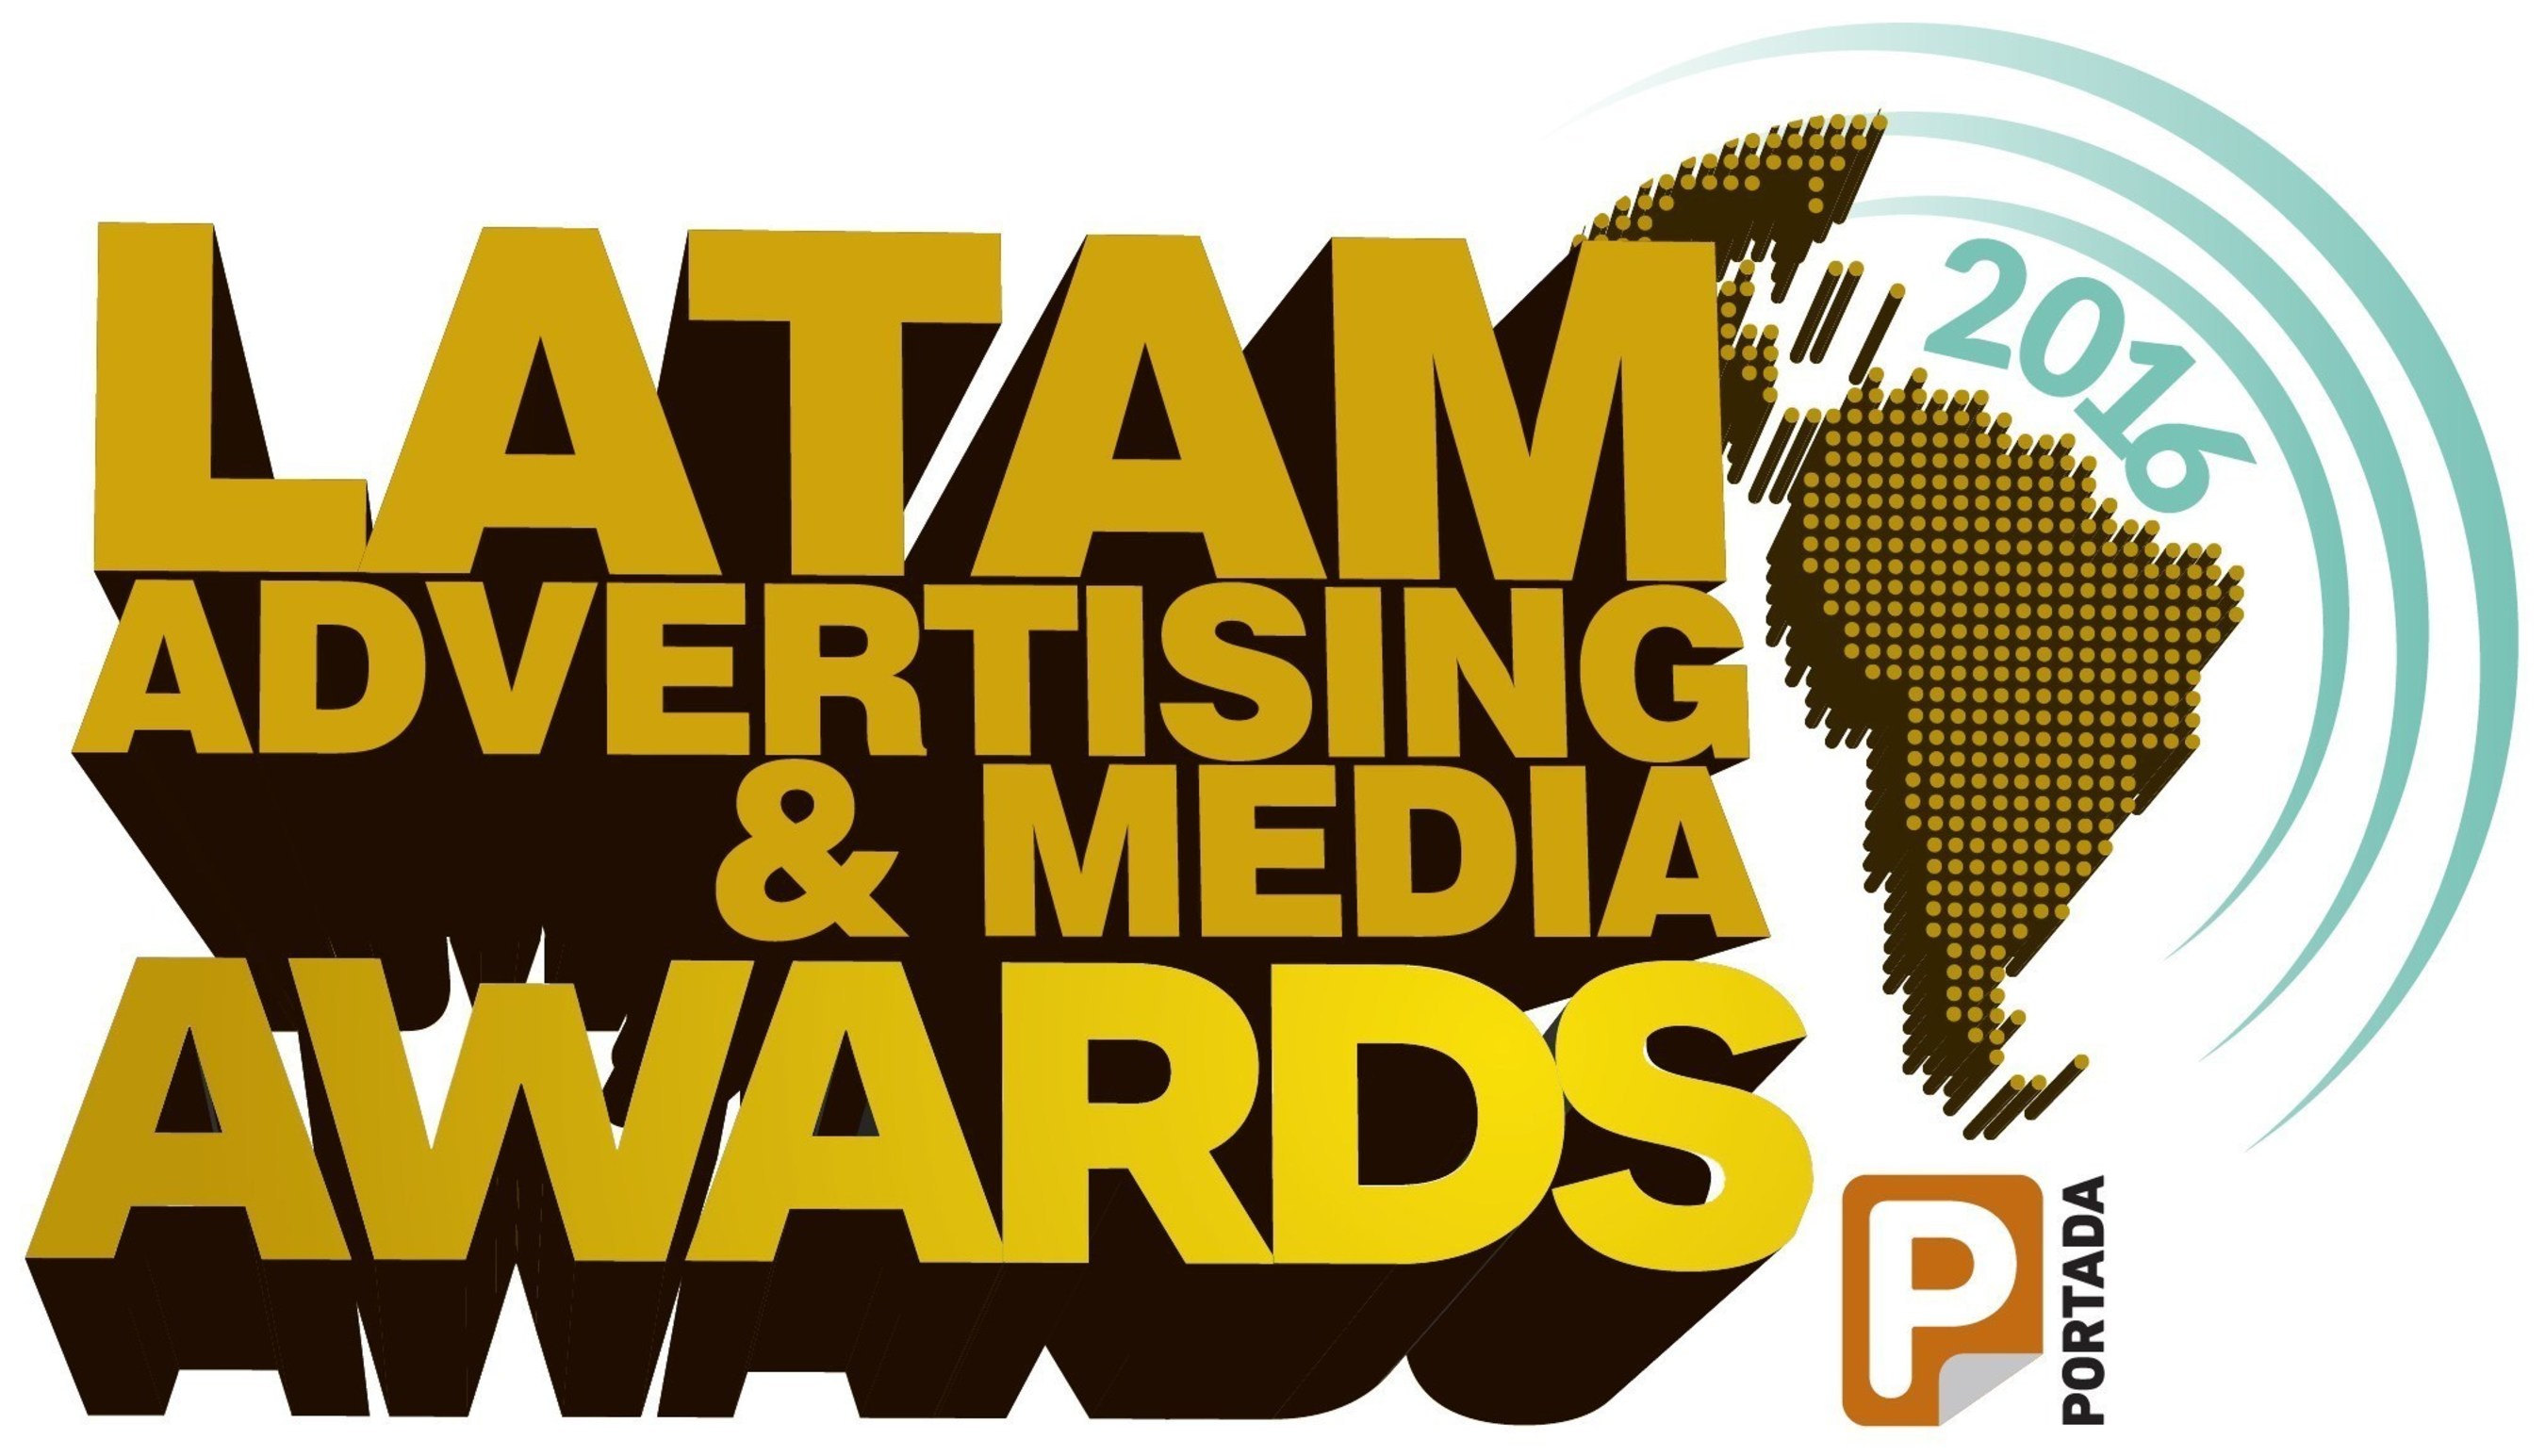 After thousands of votes were casted, the three most voted nominees per category have been established. Now the award jury, comprised of major brand marketers, will choose the winner in each of the categories! Winners to be announced at the Award Ceremony on Day 2 of PortadaLat on June 9. Get your Day 2 (or the Combo Day 1 and 2 Ticket) here! https://goo.gl/TDm5K2